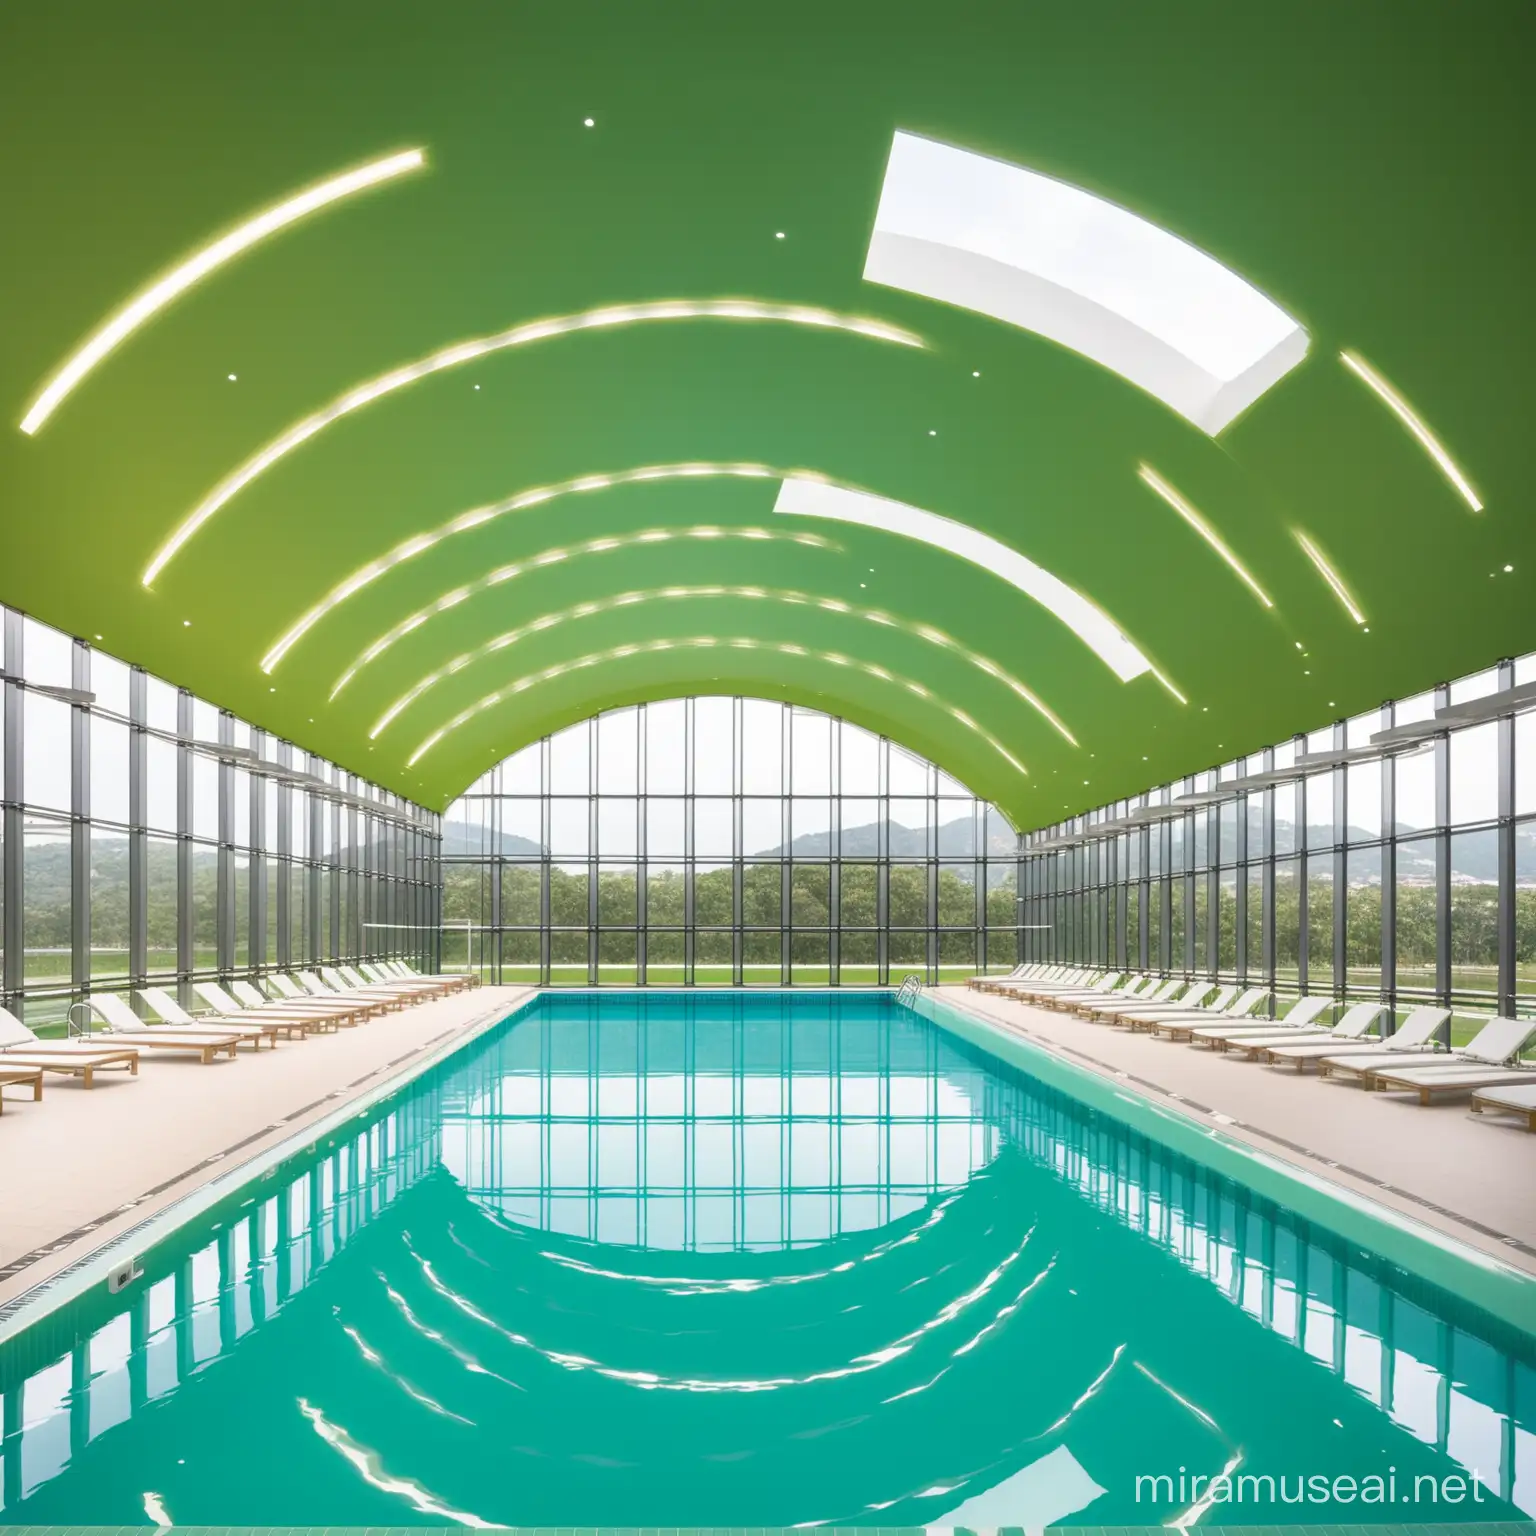 Green Wellness Oasis Indoor Swimming Pool and Wellness Center